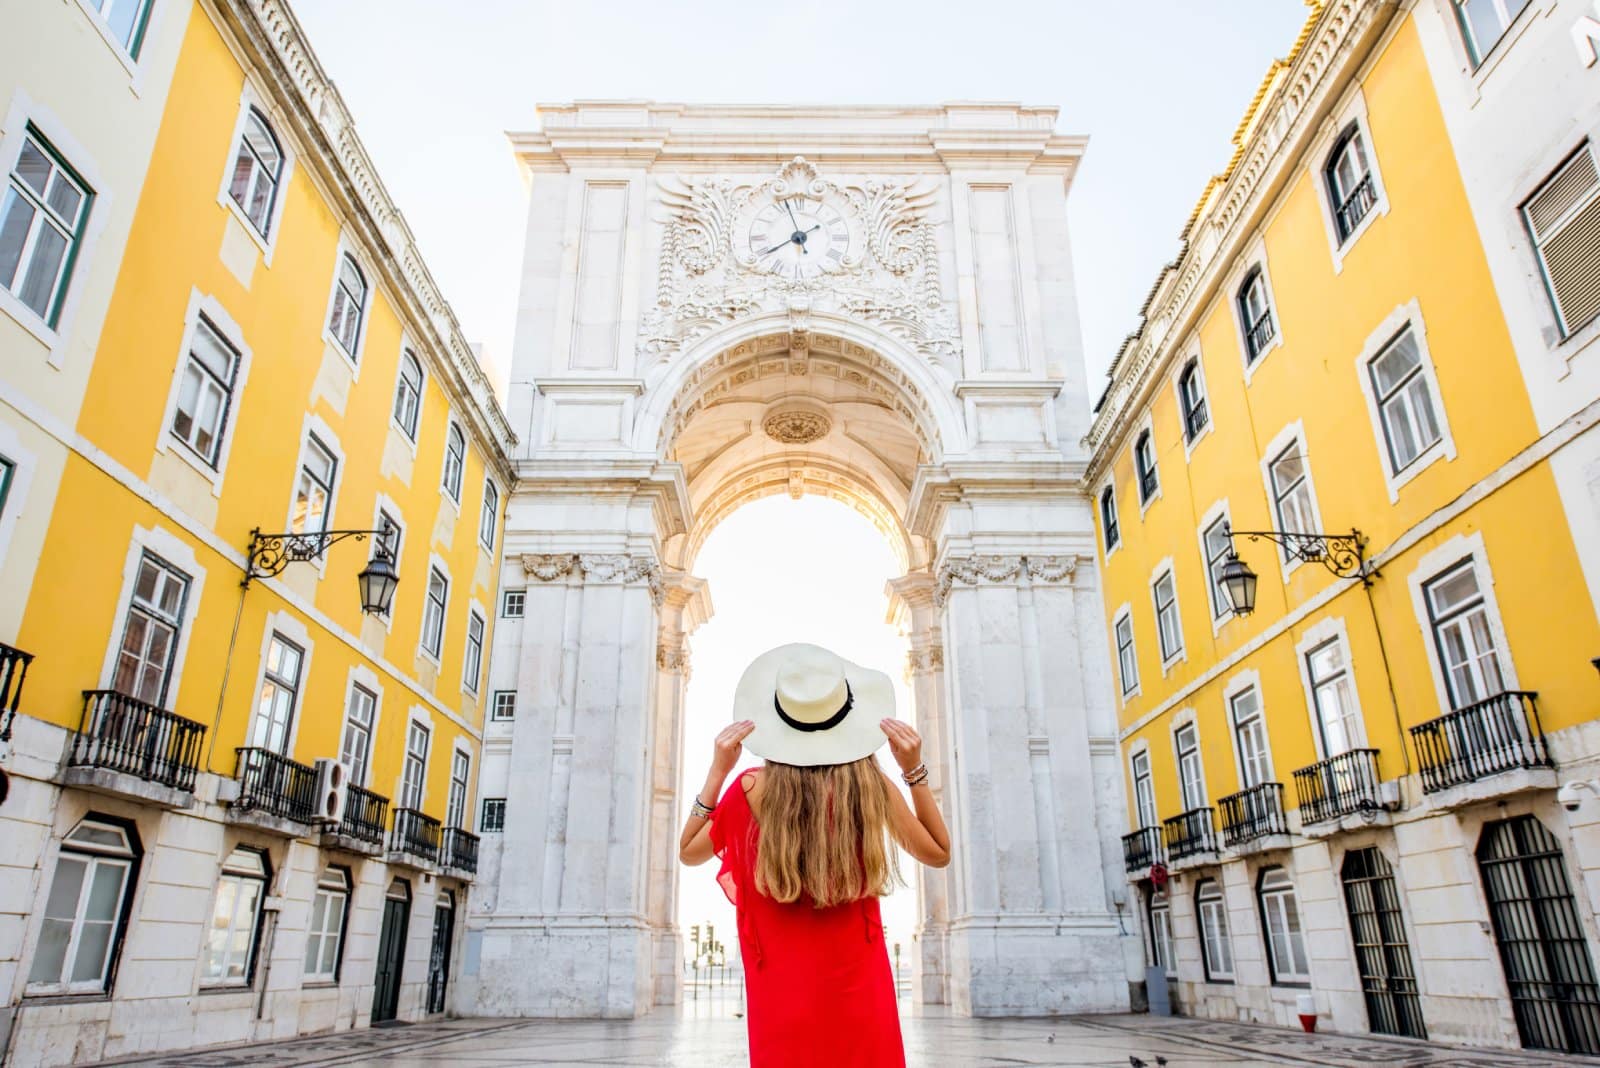 <p class="wp-caption-text">Image Credit: Shutterstock / RossHelen</p>  <p><span>Solo travel is an incredible opportunity to explore the world on your own terms, offering a sense of freedom and personal growth that is hard to match. The destinations highlighted in this guide are chosen for their welcoming atmosphere, ease of navigation, and the rich experiences they offer to solo adventurers. Whether you’re drawn to the serene temples of Kyoto, the historic streets of Dublin, or the vibrant markets of Santiago, each destination provides a unique setting for a memorable solo journey. Embarking on a solo trip requires courage but also opens the door to unforgettable experiences, new friendships, and a deeper understanding of the world and yourself. </span></p>